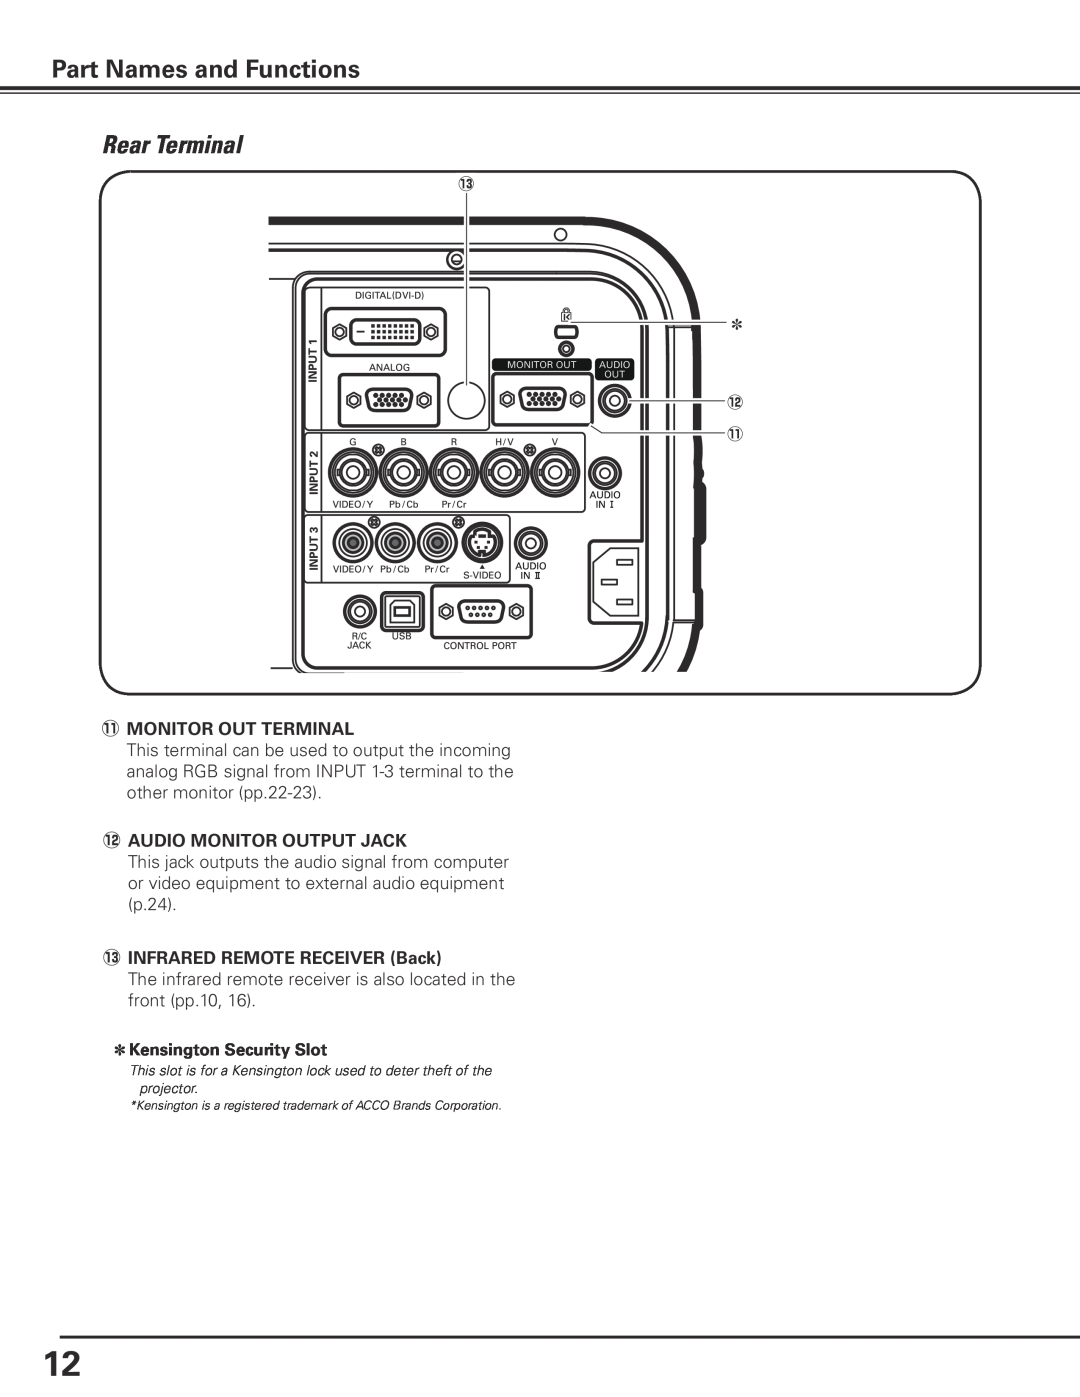 Sanyo PLC-XP200L Part Names and Functions, Rear Terminal, The infrared remote receiver is also located in the front pp.10 